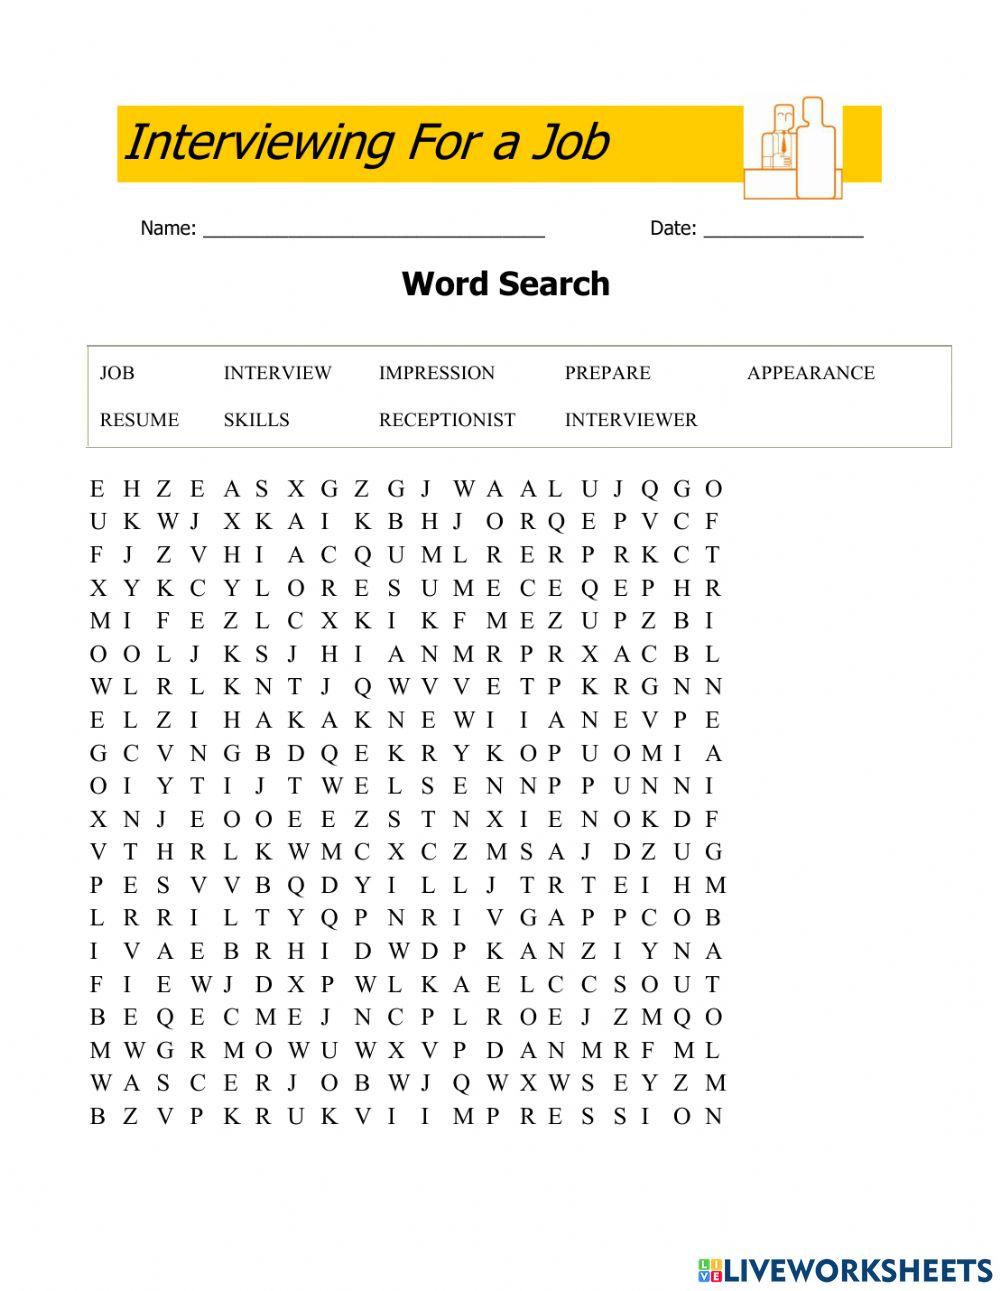 Interviewing for a Job Wordsearch